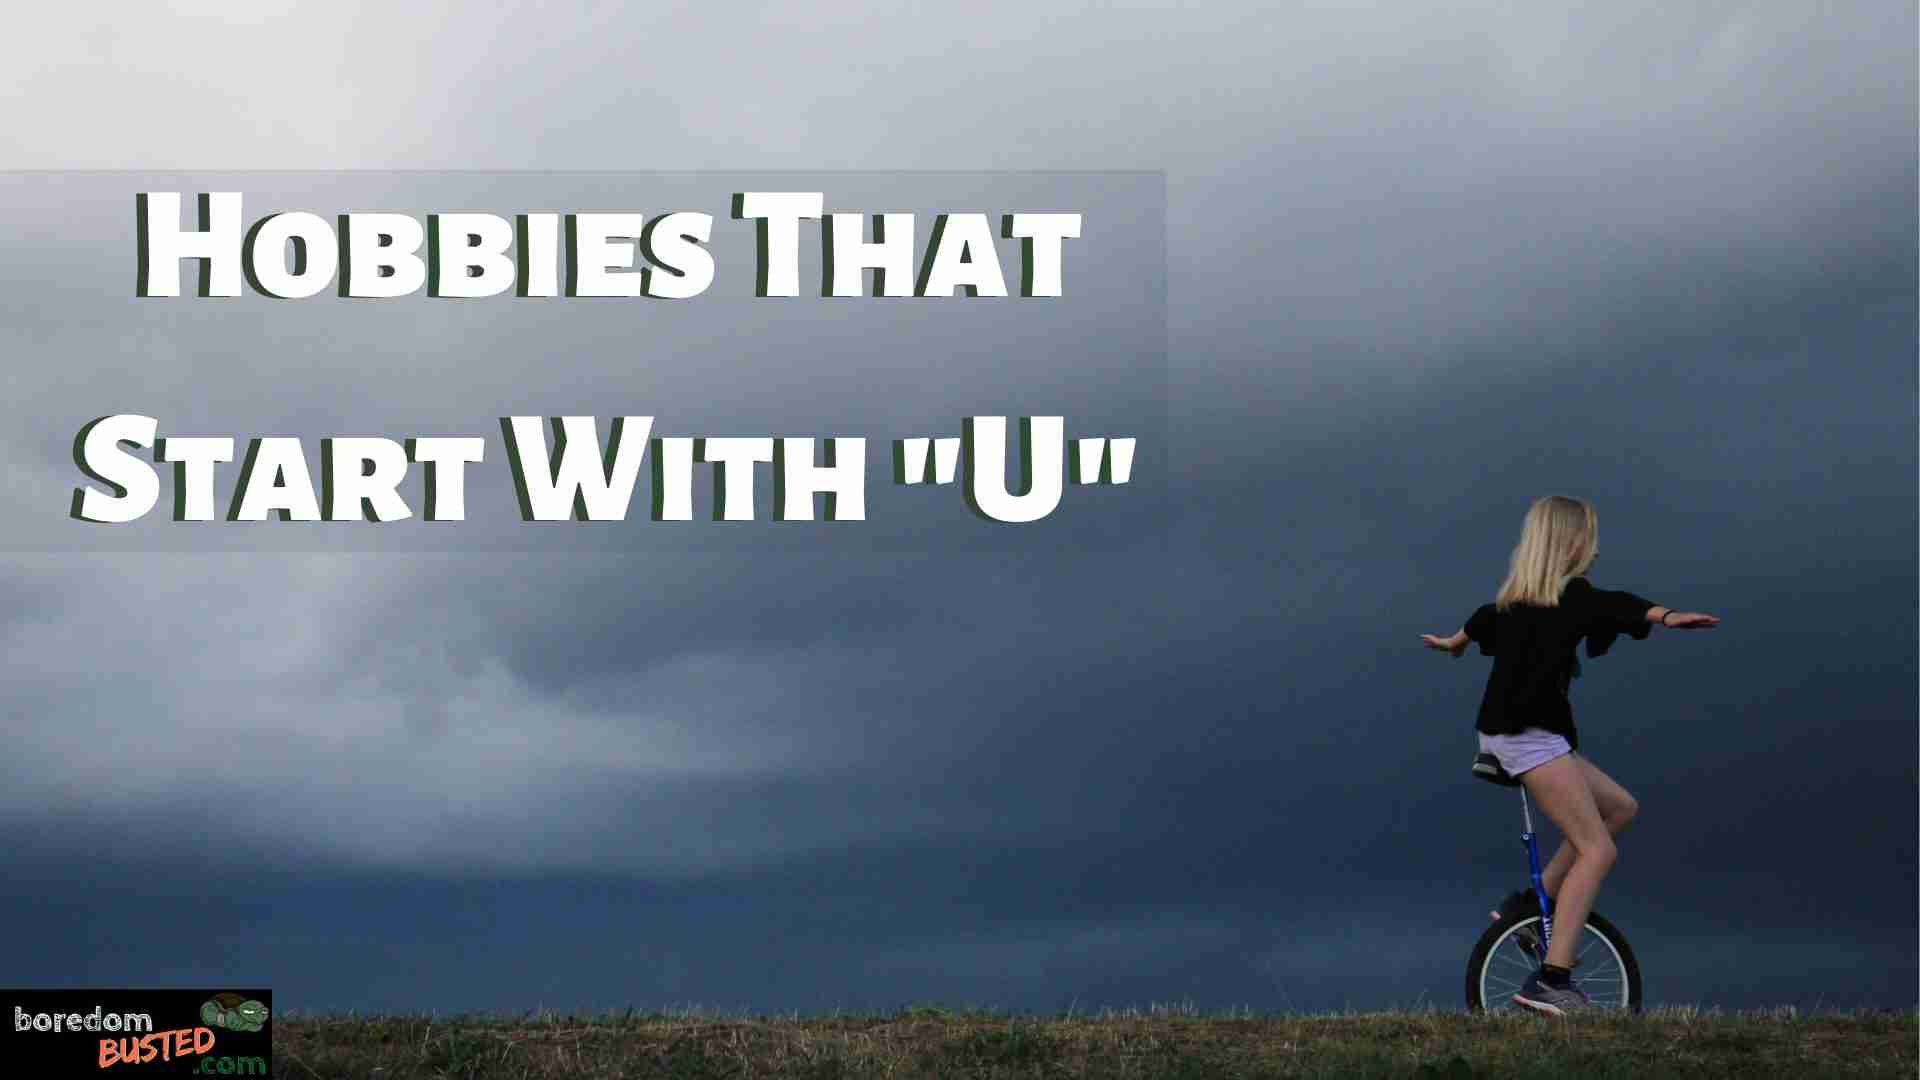 Hobbies that Start with U, woman on unicycle under dark clouds